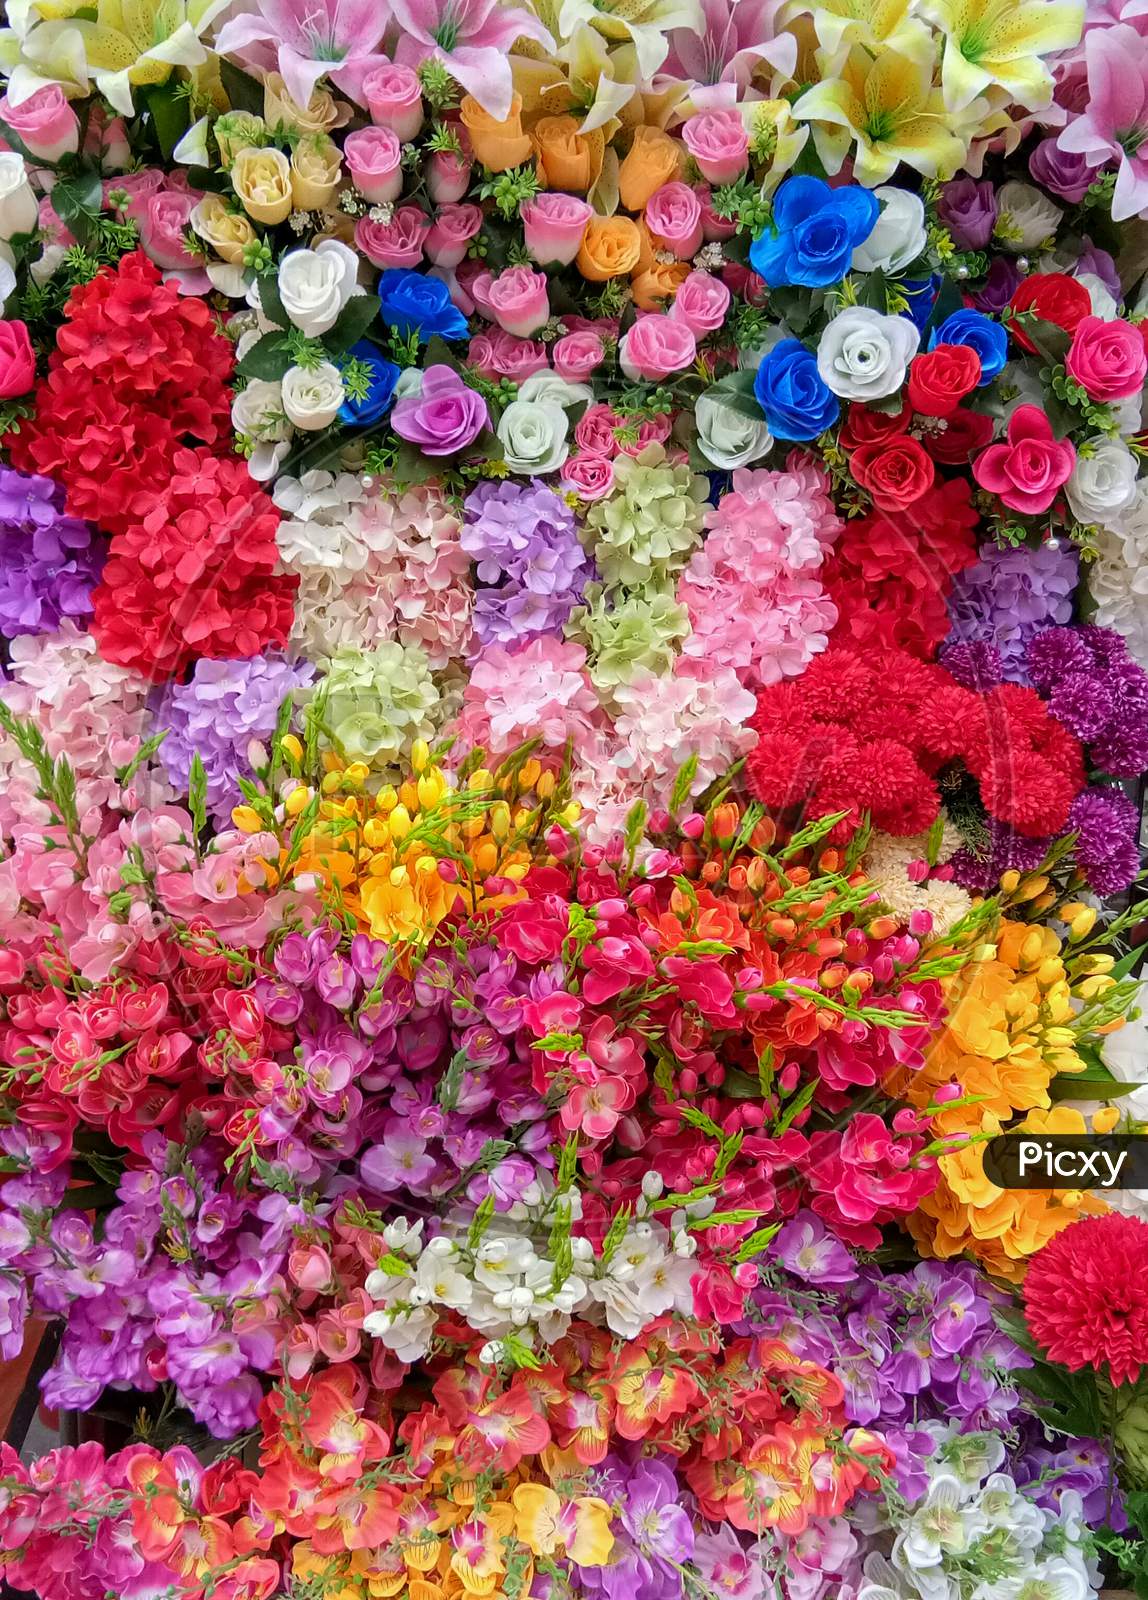 Colorful Artificial Flowers Top View Multicolor Bouquet Full Frame, Vertical Picture, Beautiful Background For Celebrate Theme.